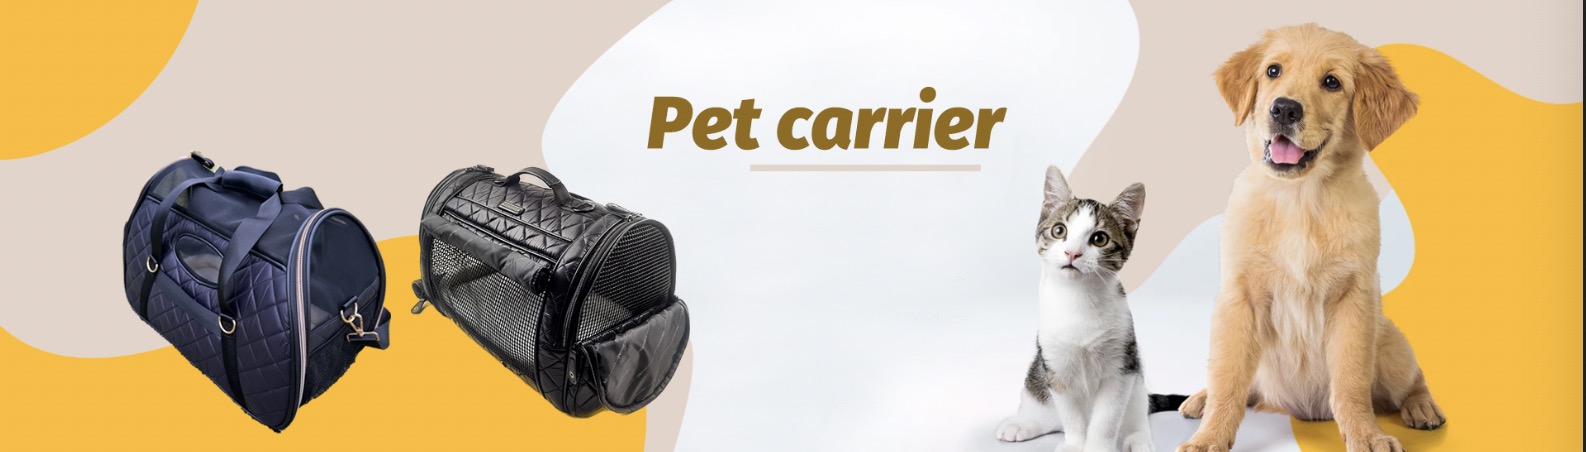 Quilted Pet carrier